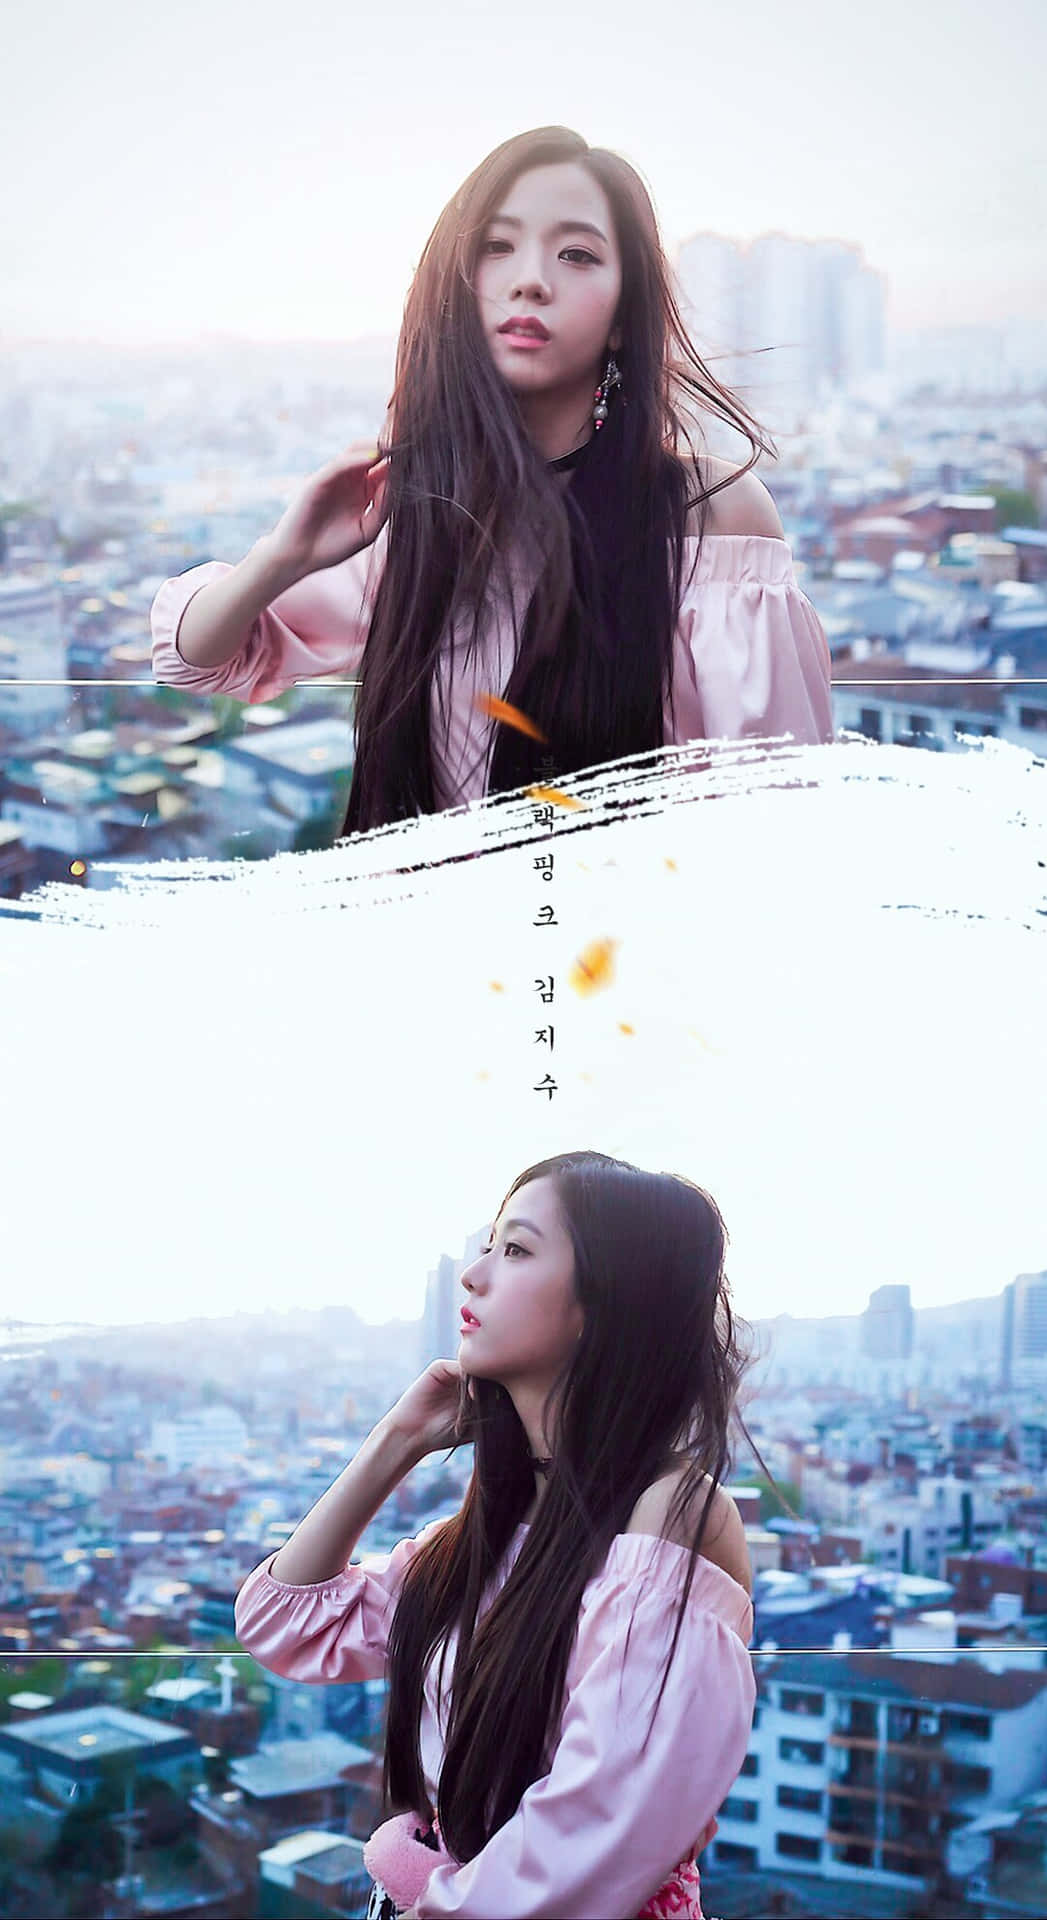 Jisooblackpink Ruffigt Hår (for A Computer Or Mobile Wallpaper Featuring Jisoo From The K-pop Group Blackpink With Her Hair Styled In A Messy Fashion) Wallpaper